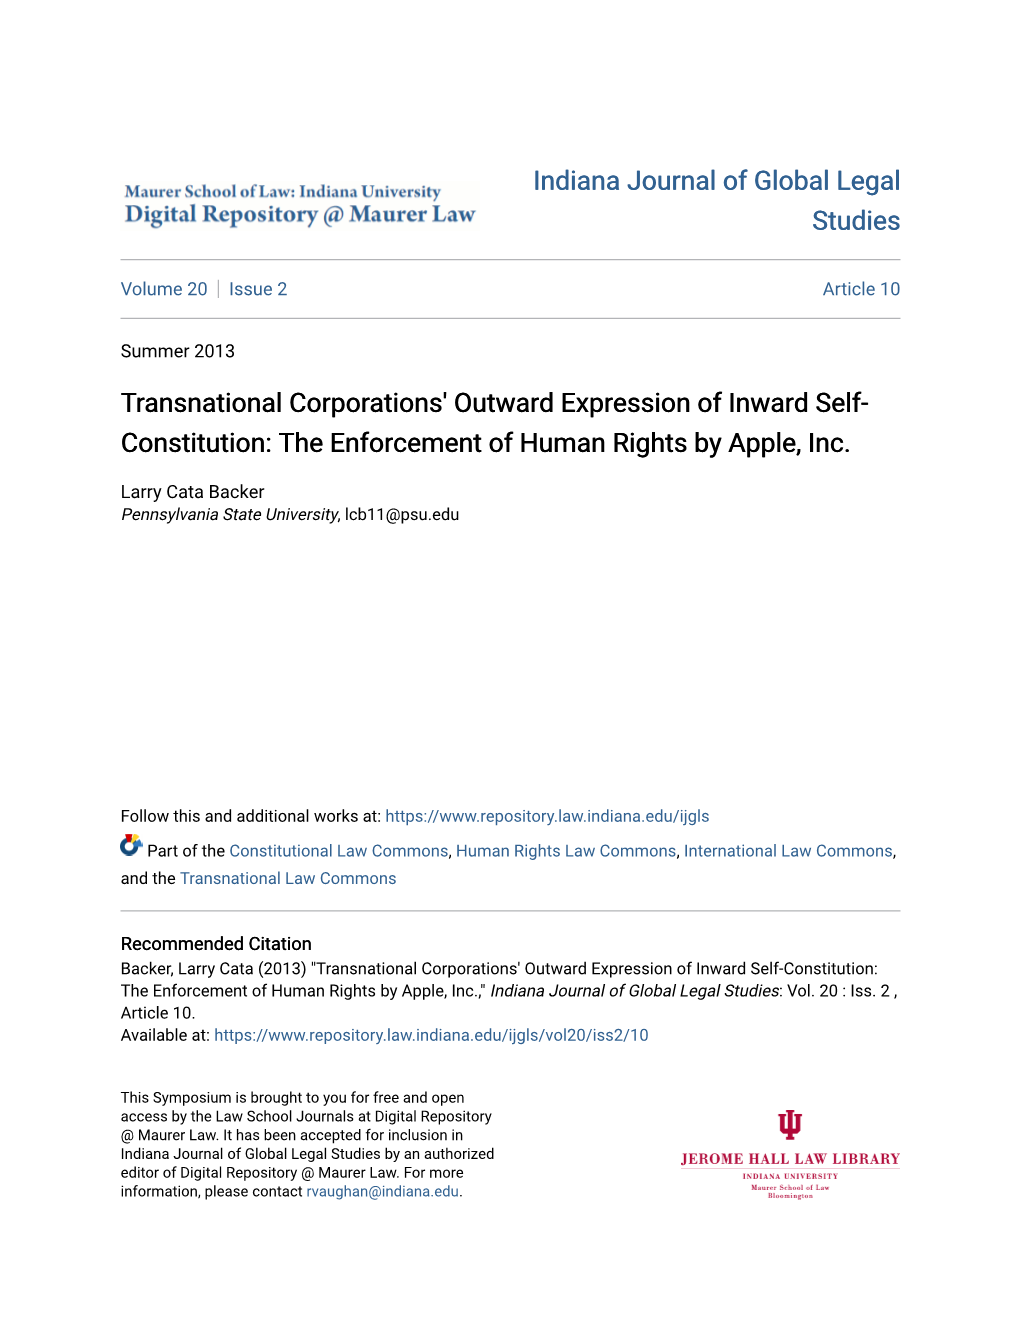 Transnational Corporations' Outward Expression of Inward Self- Constitution: the Enforcement of Human Rights by Apple, Inc